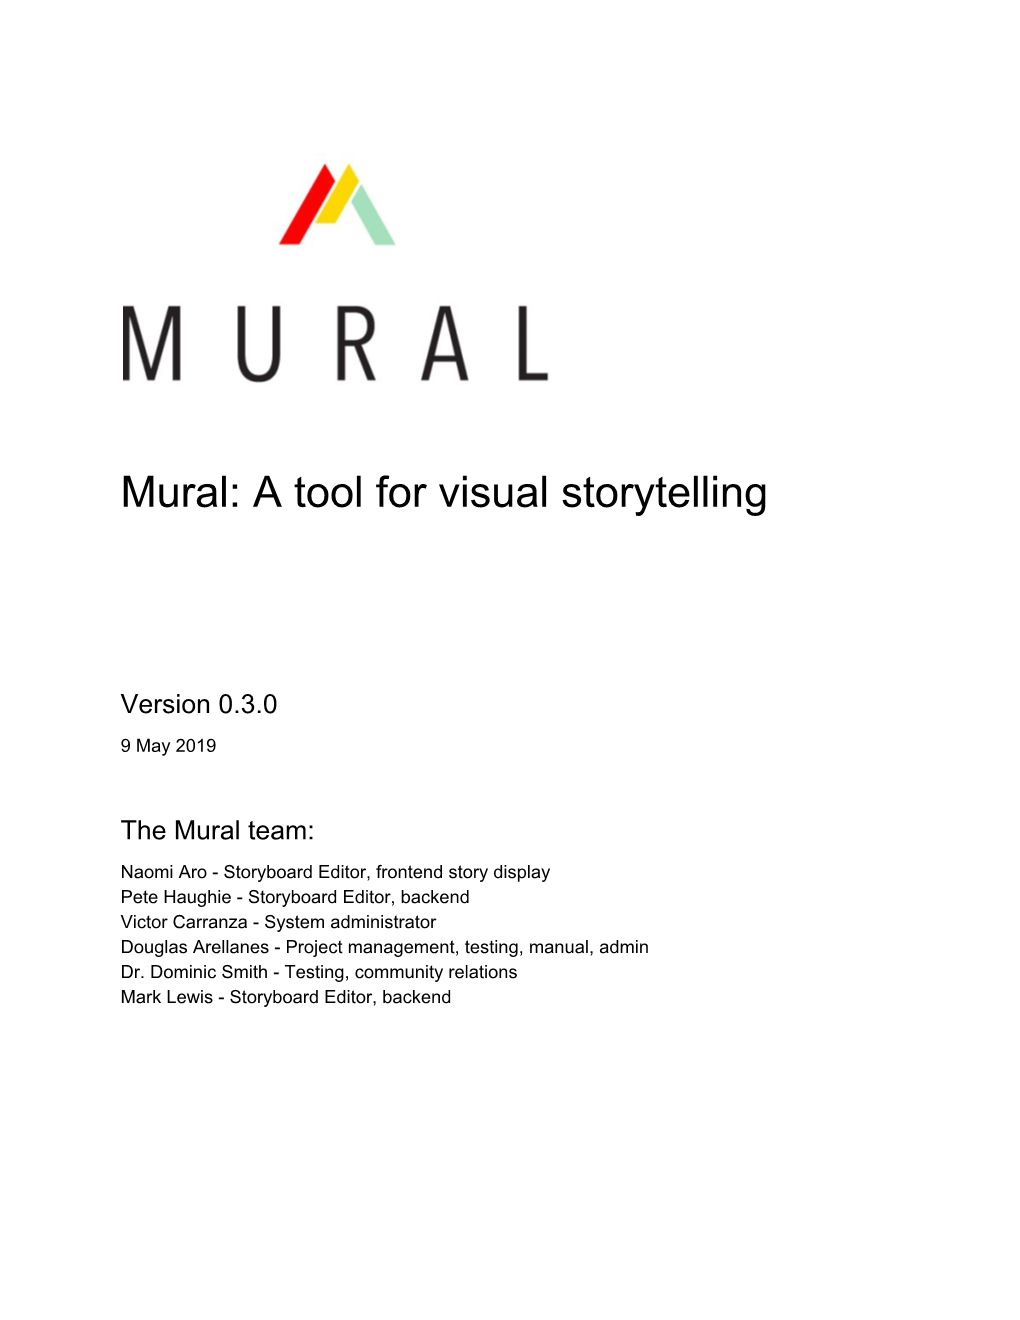 A Tool for Visual Storytelling